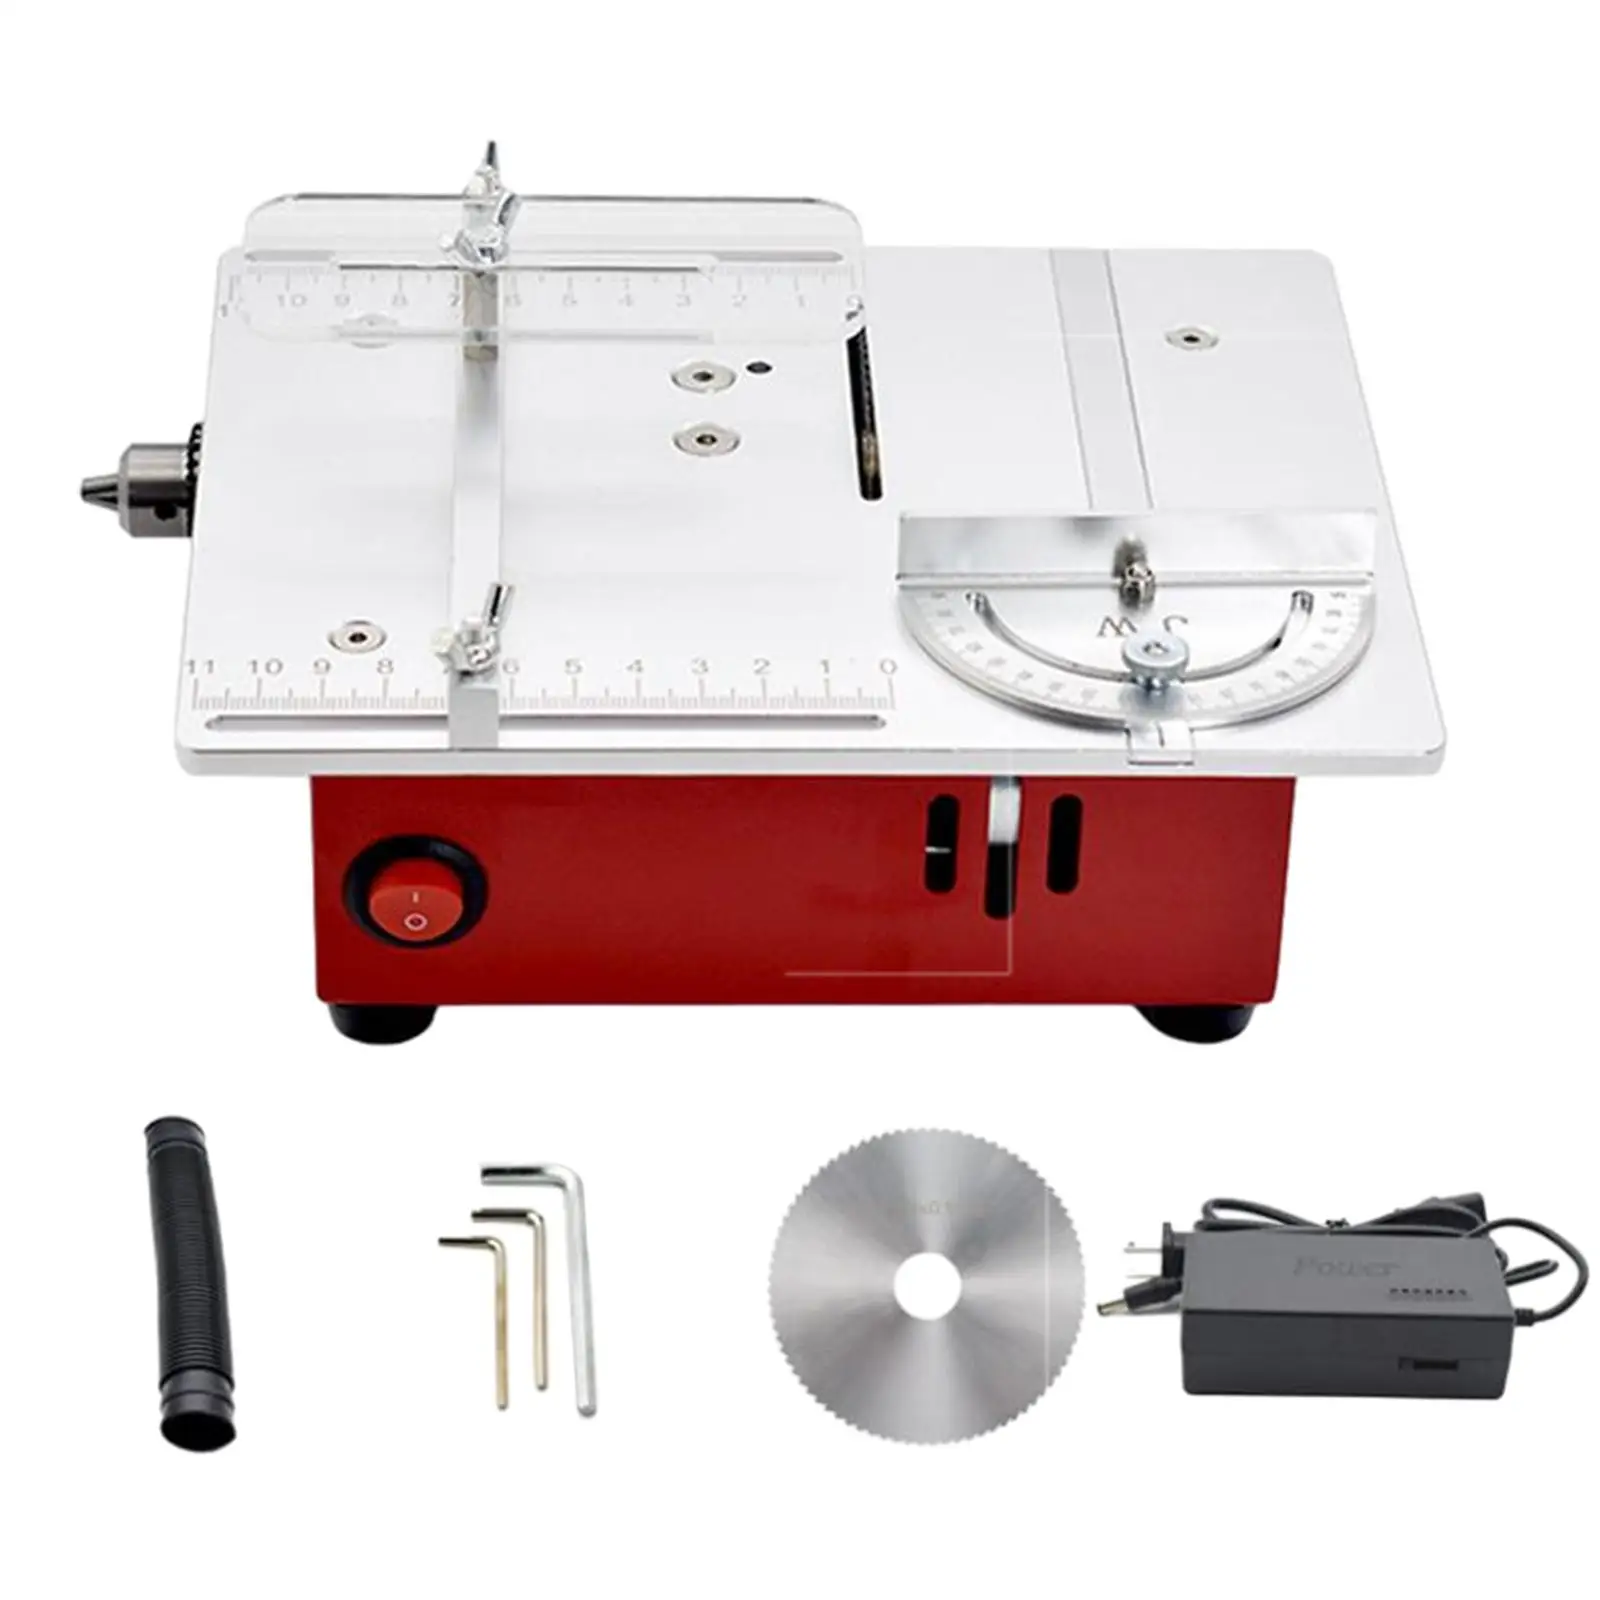 Mini Table Saw Adjustable Small Precision Hobby Table Saw for Plastic Wood Aluminum Copper Acrylic Cutting Miniature Wood Crafts